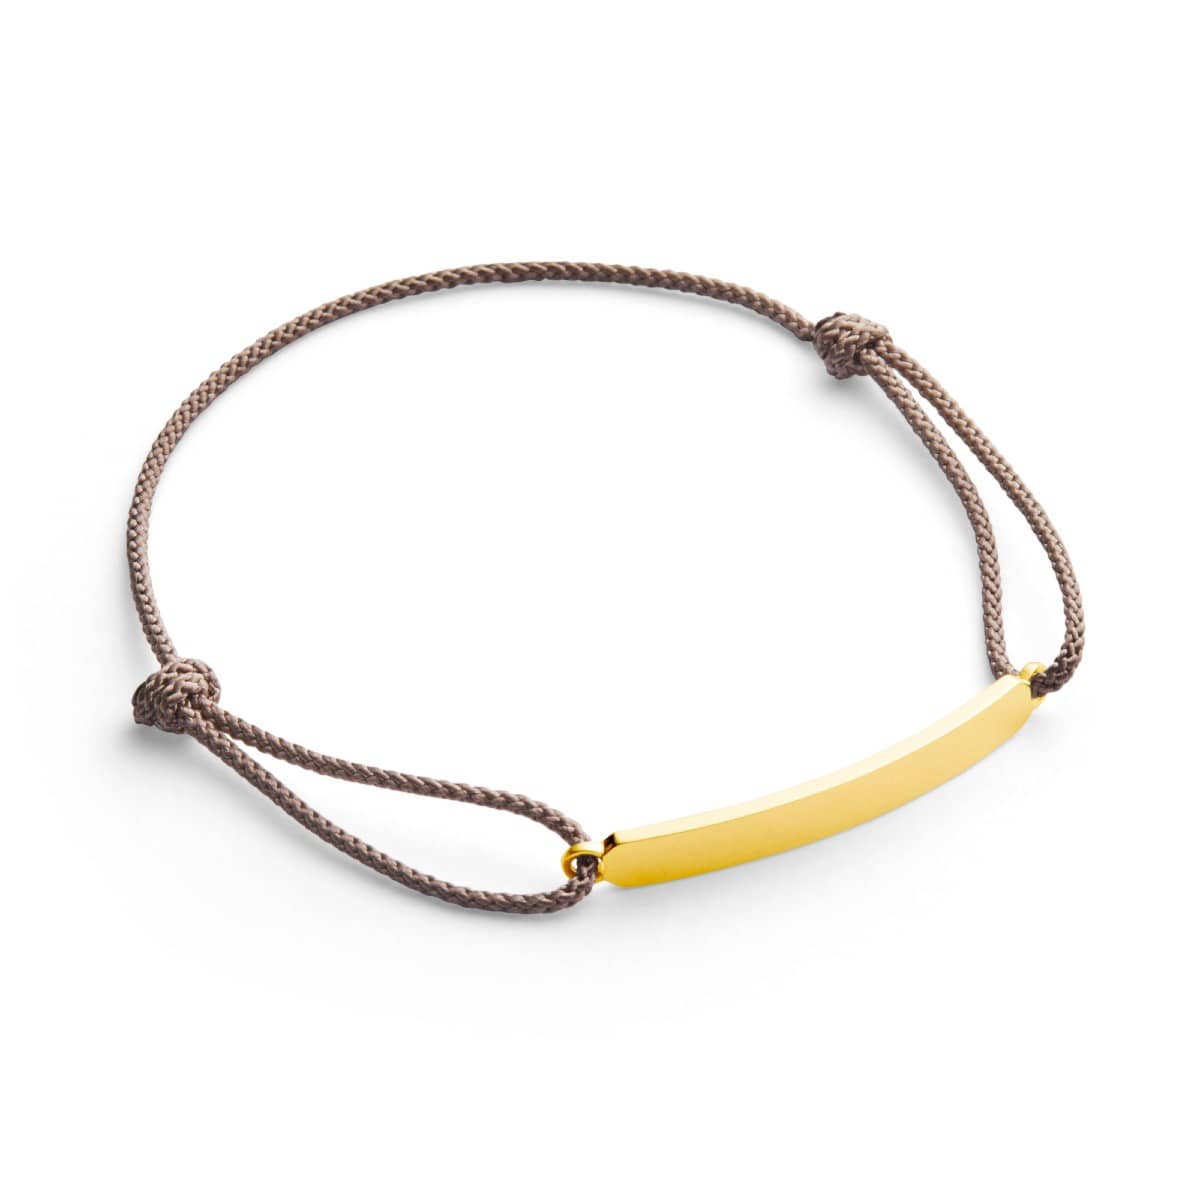 gold id bracelet with natural cord